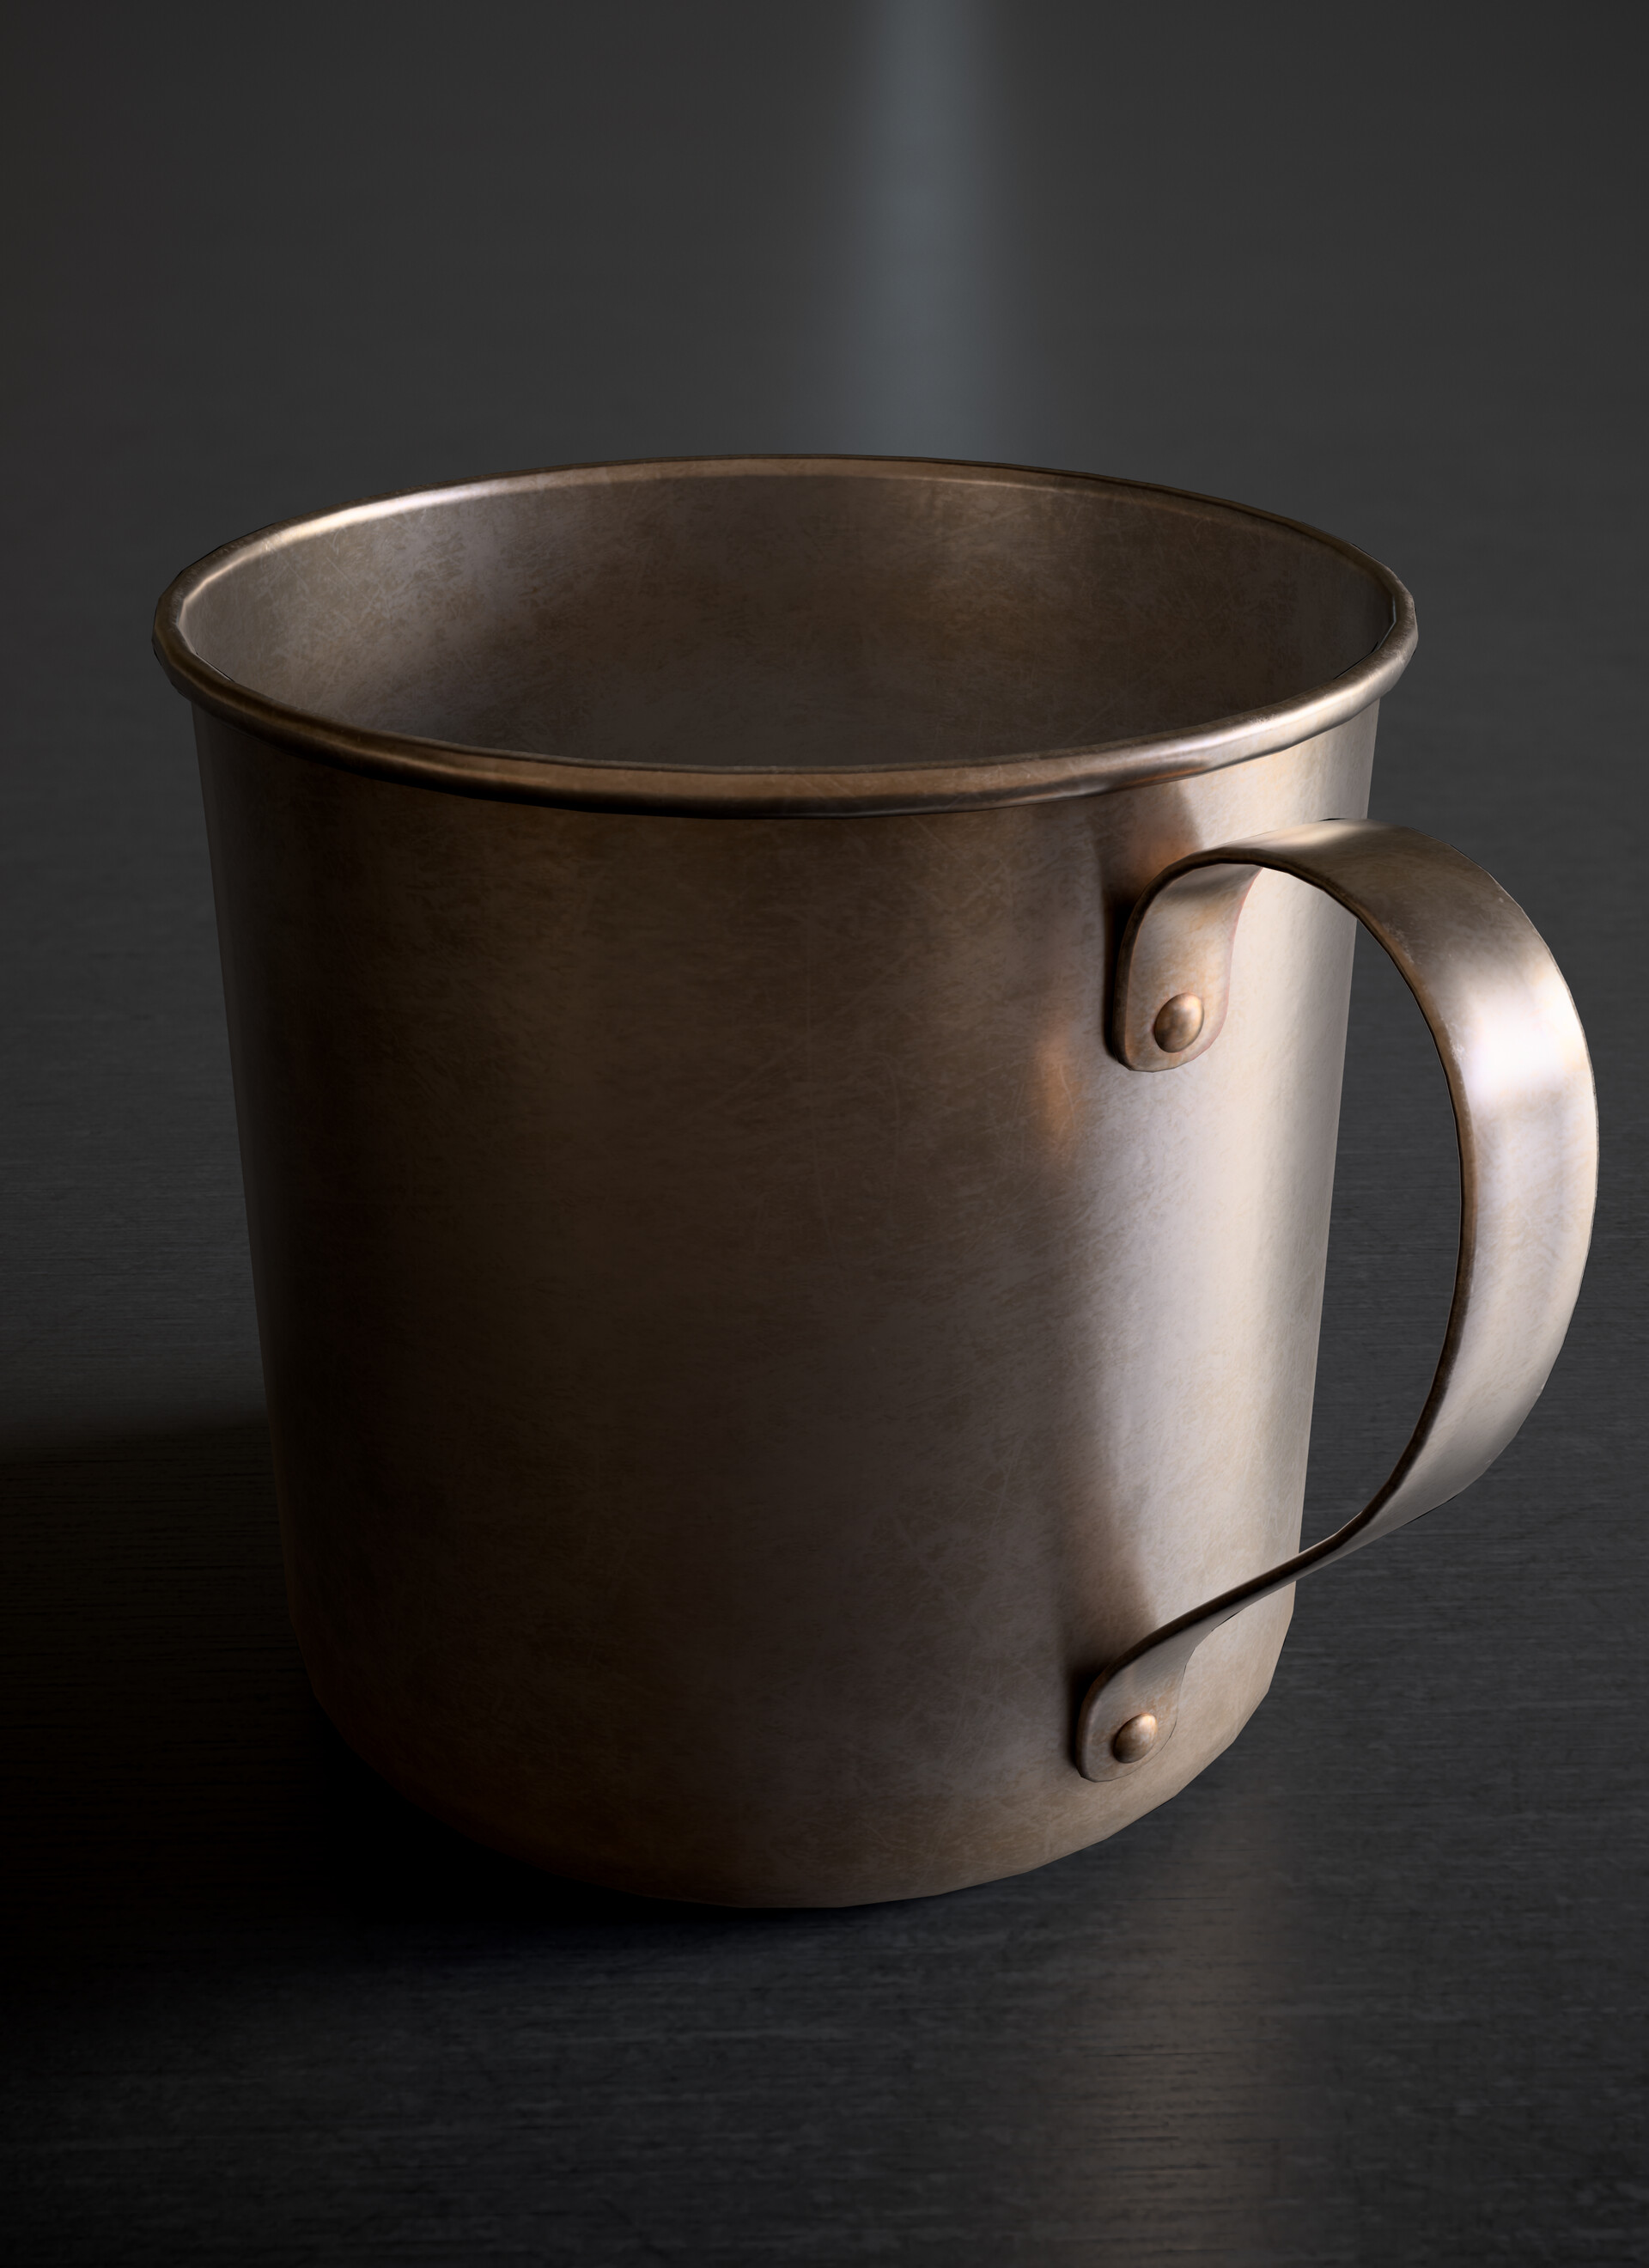 66,573 Old Metal Cup Images, Stock Photos, 3D objects, & Vectors